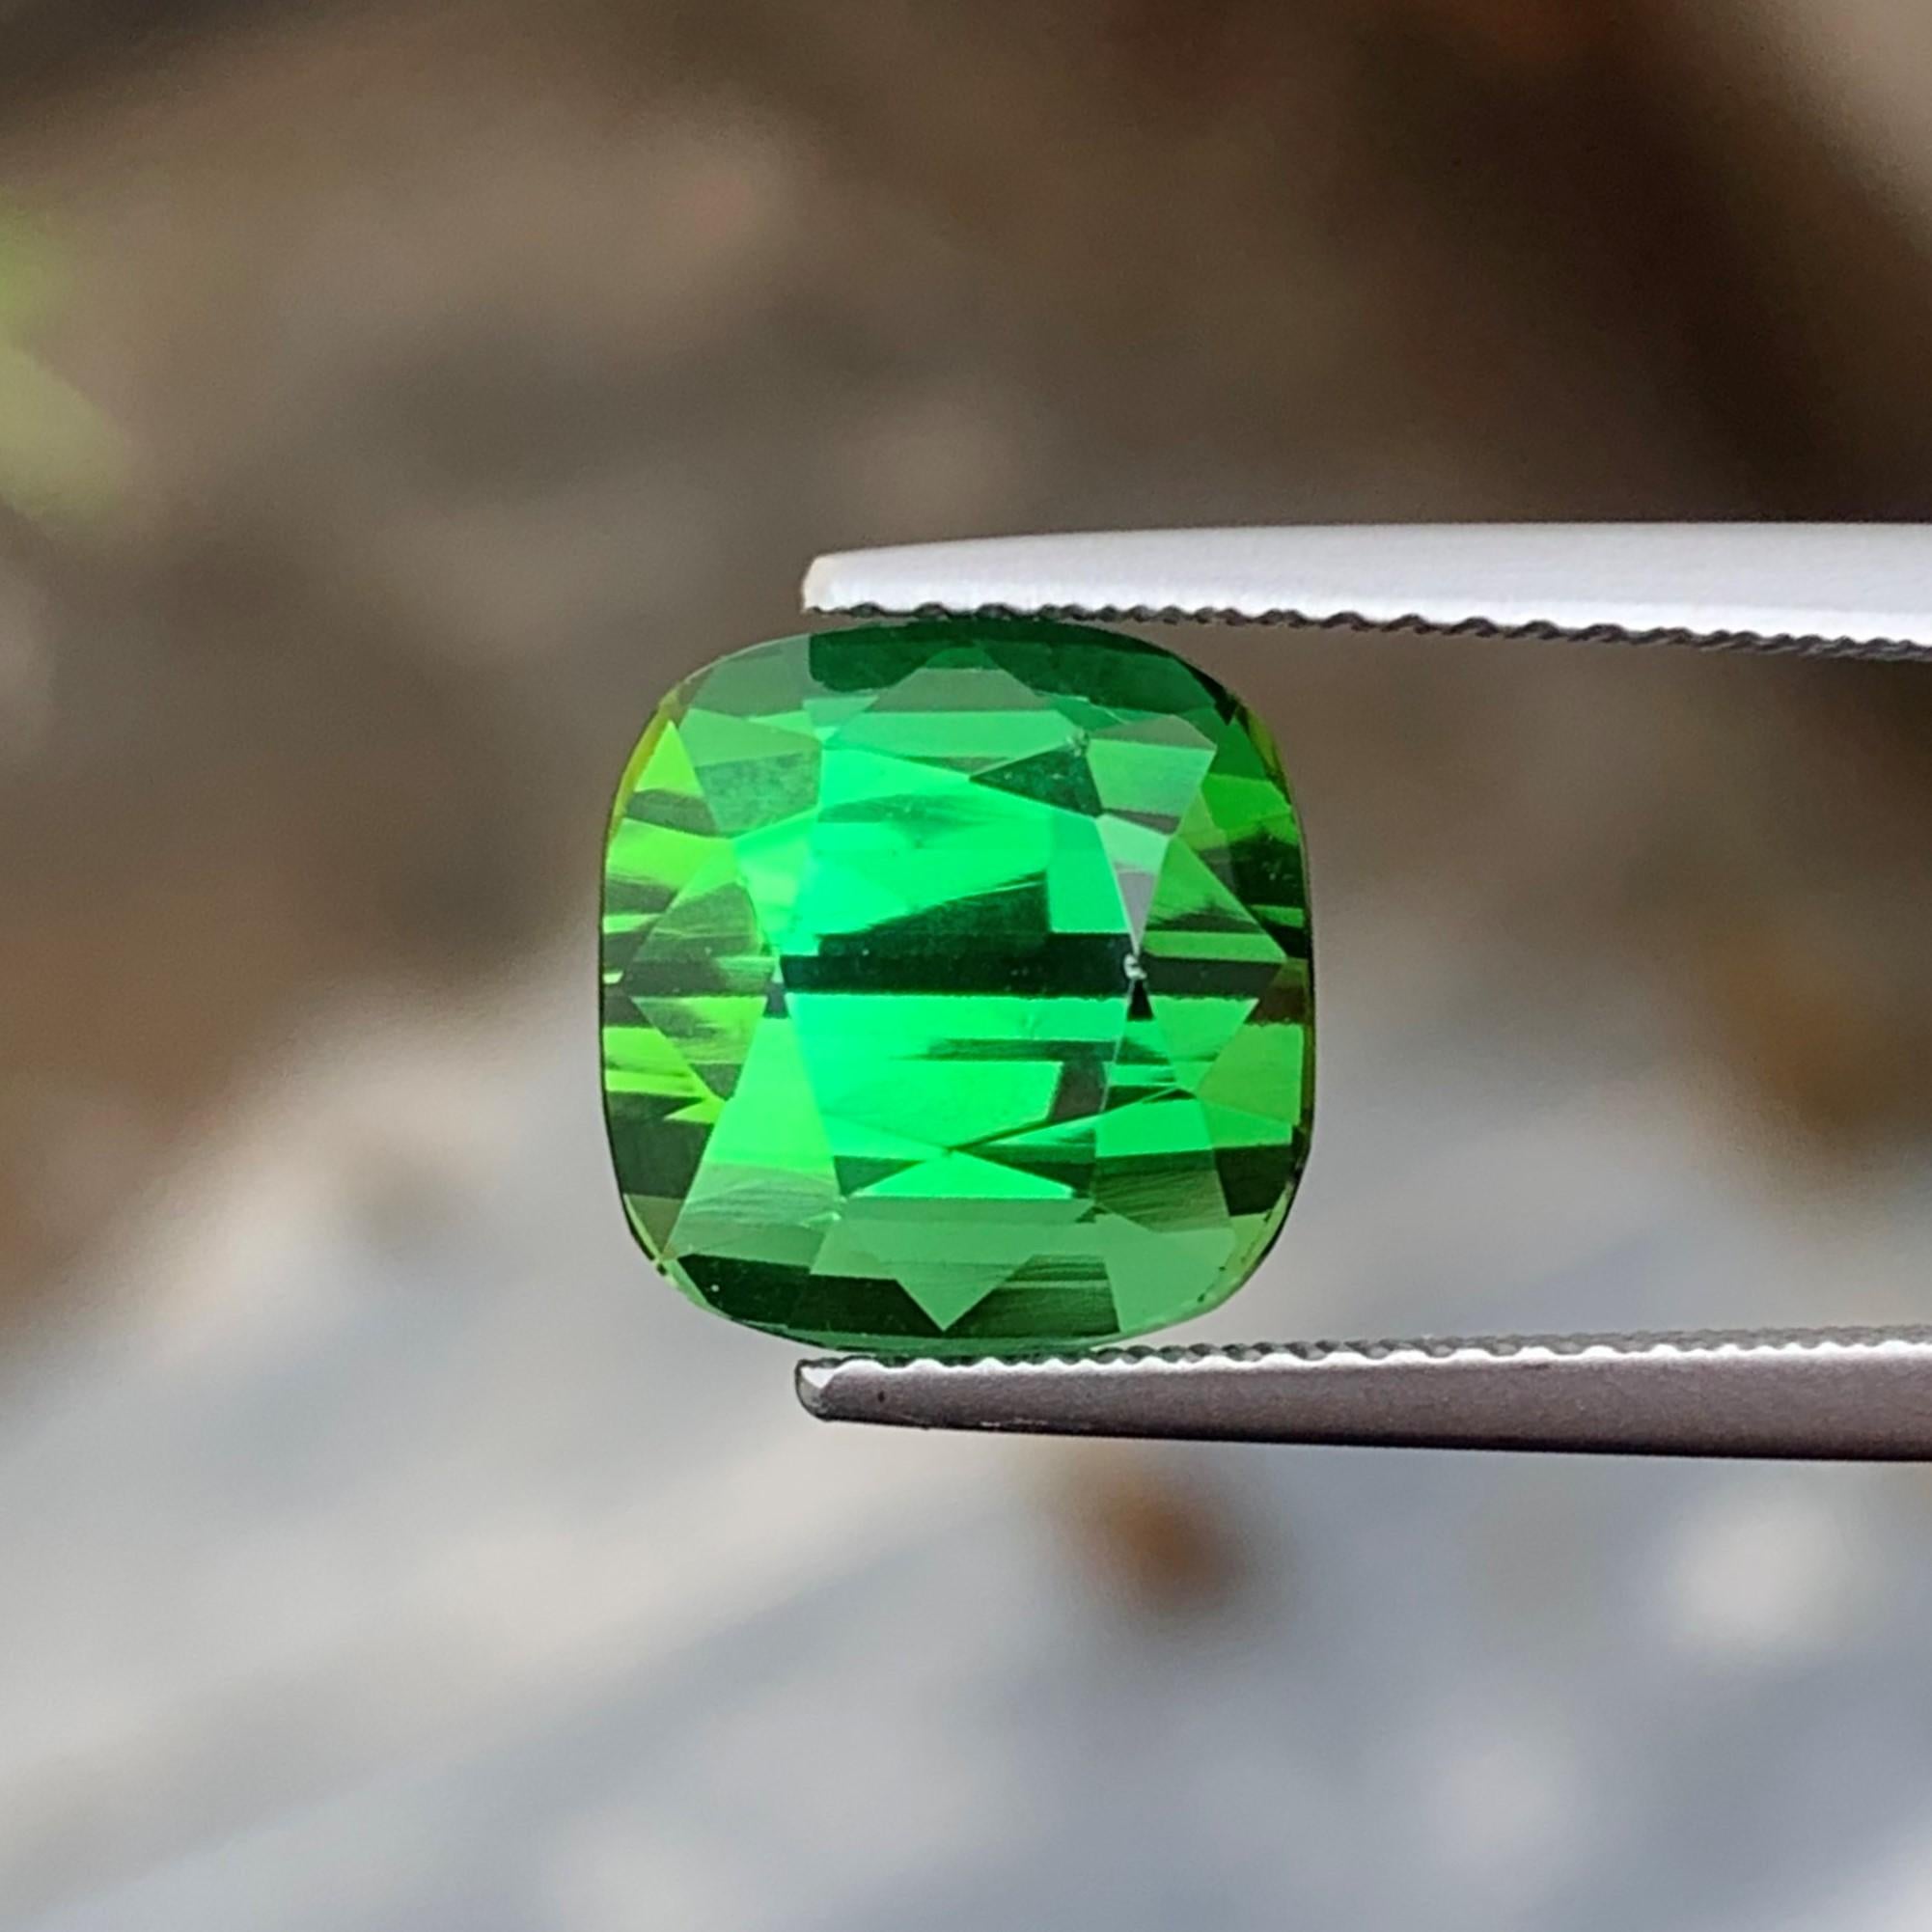 Gemstone Type : Tourmaline
Weight : 5.95 Carats
Dimensions : 9.6x9.9x8.2 Mm
Origin : Kunar Afghanistan
Clarity : Eye Clean
Shape: Cushion
Color: Mintgreen
Certificate: On Demand
Basically, mint tourmalines are tourmalines with pastel hues of light